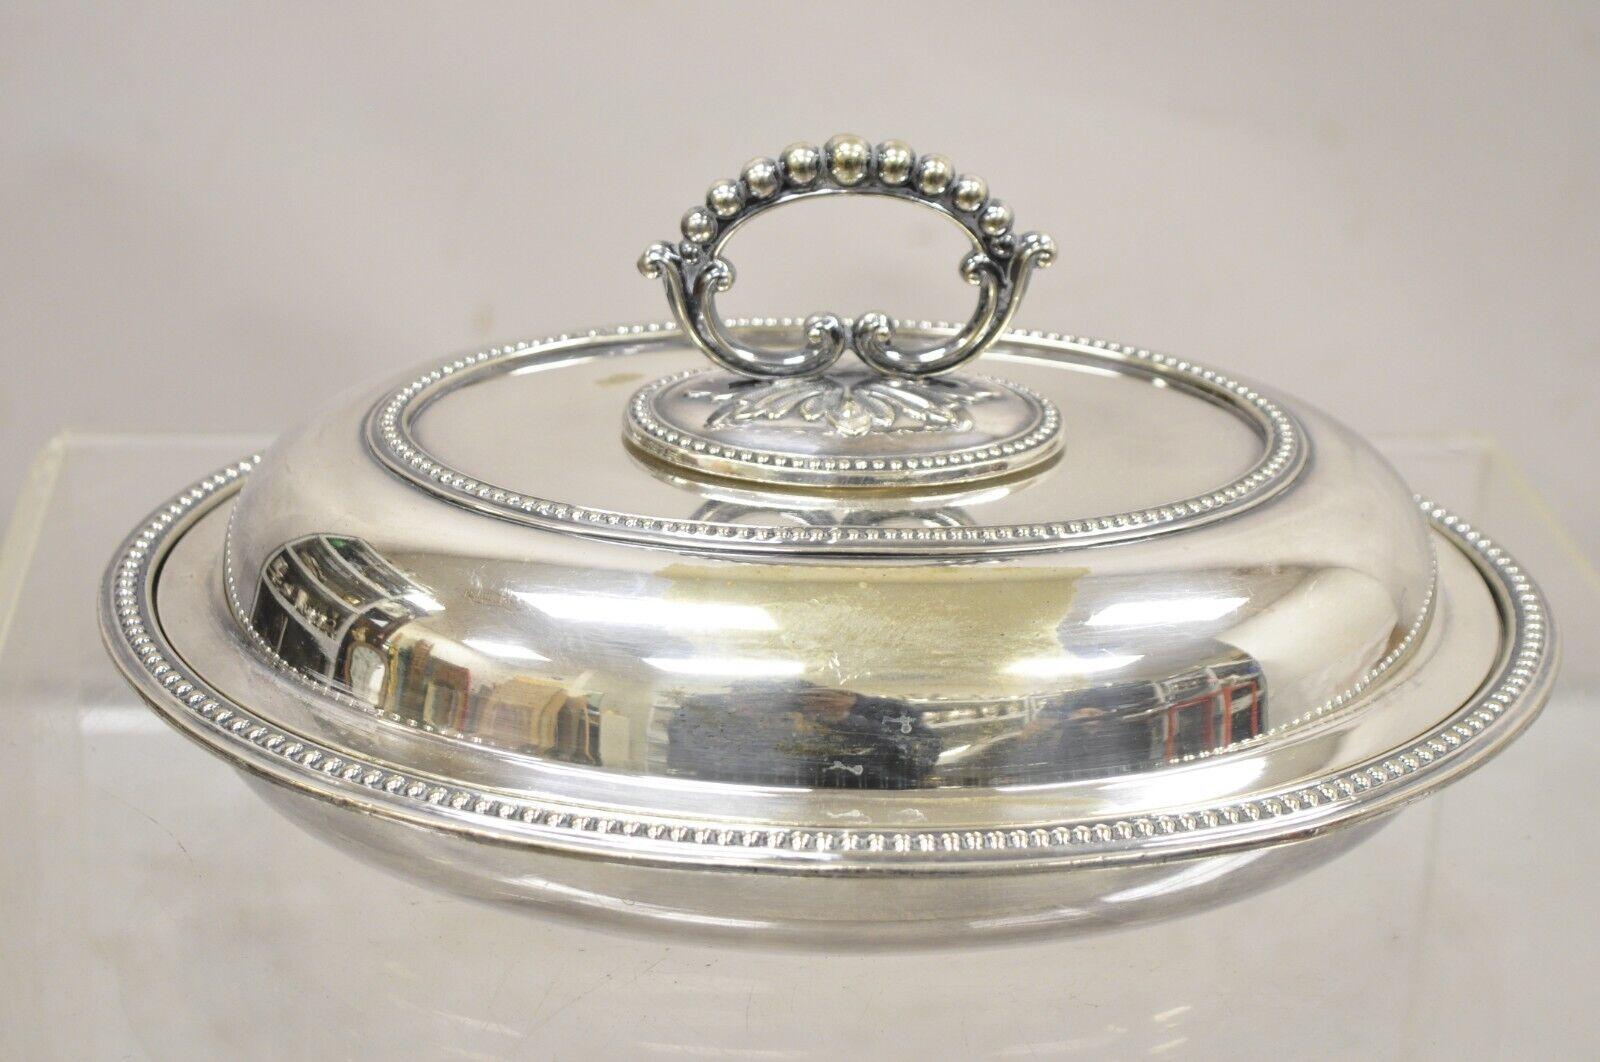 Mappin & Webb's Prince's Plate English Sheffield Silver Plated Covered Dish (20. Jahrhundert) im Angebot